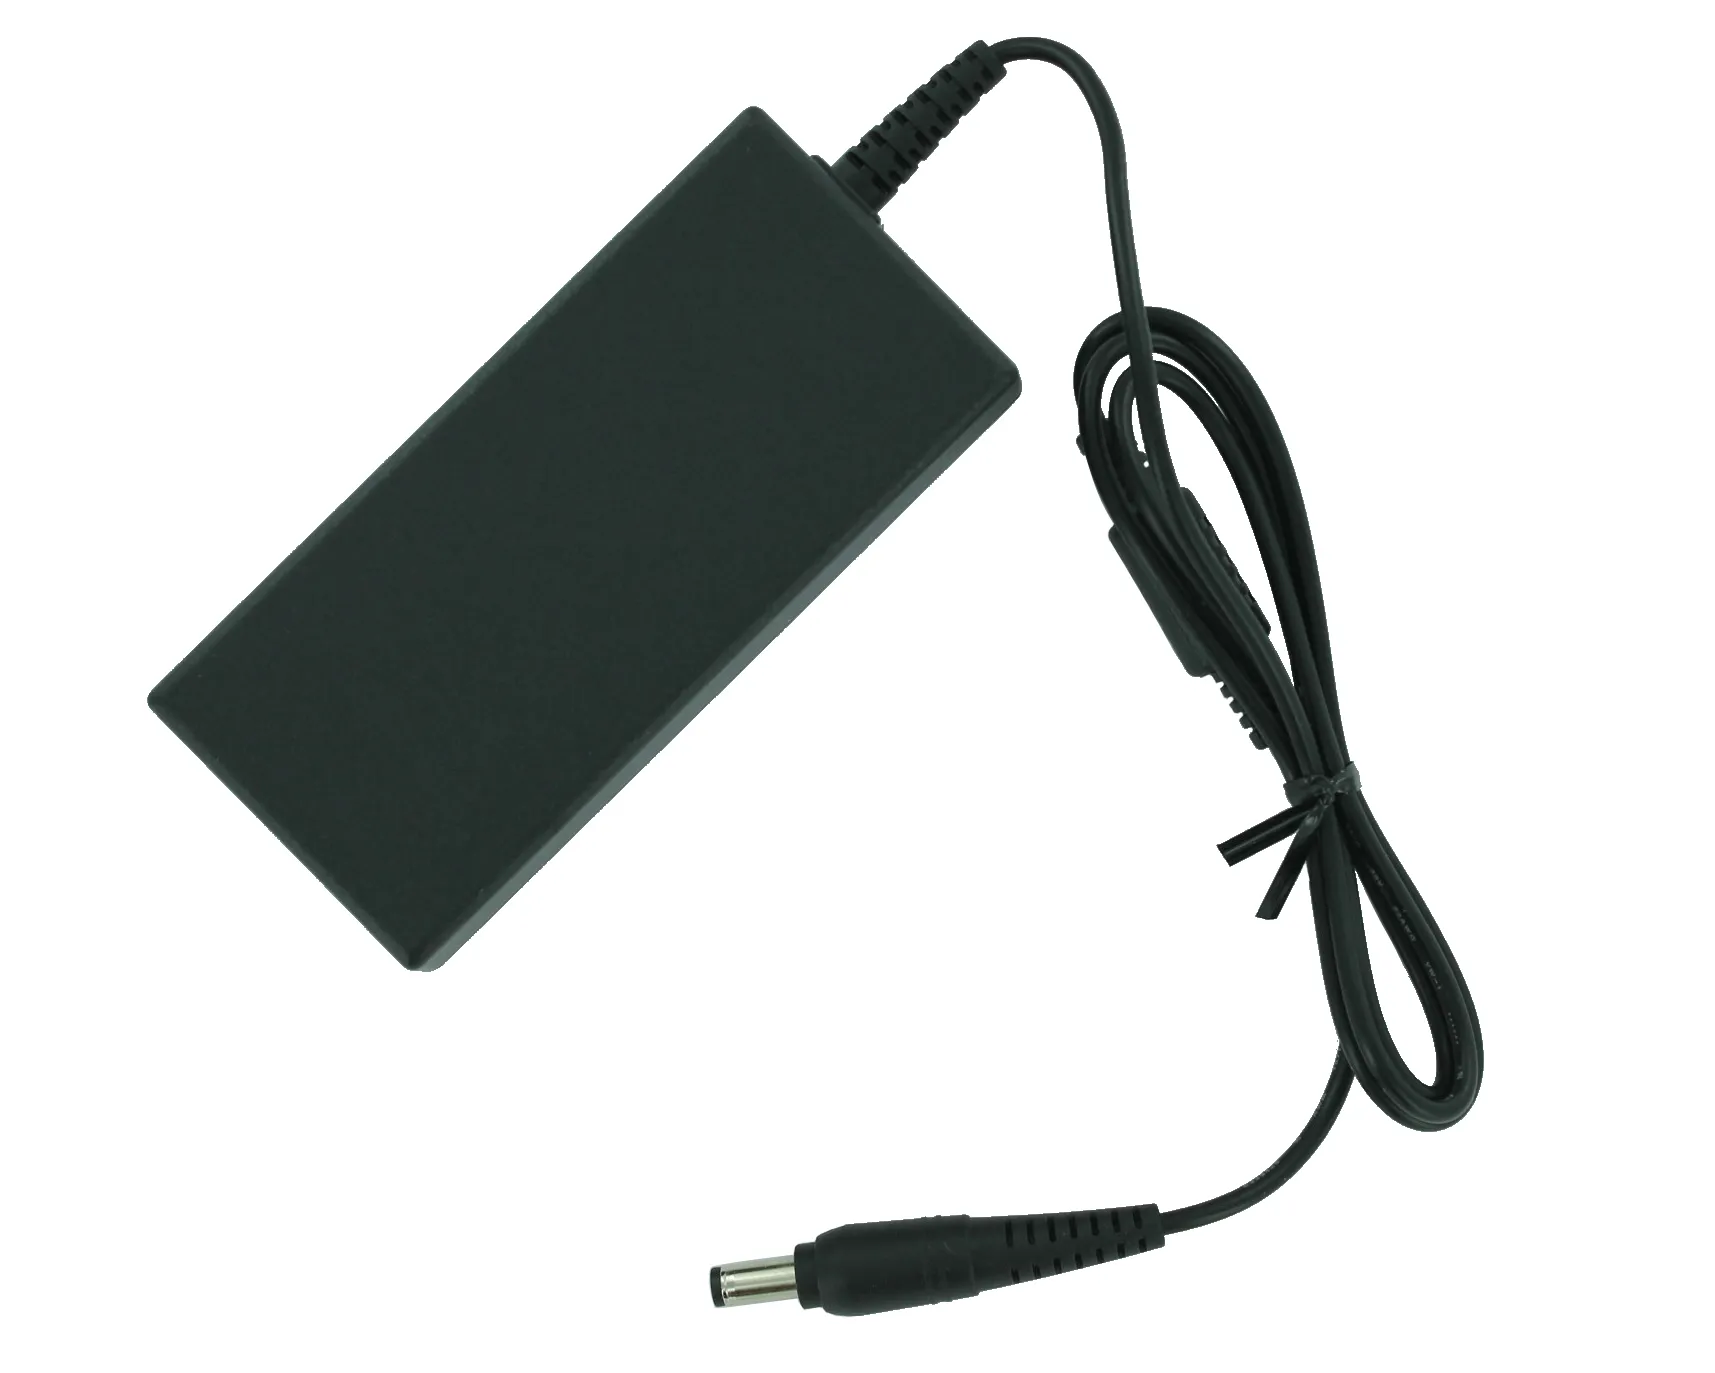 HP 290 G1 MICROTOWER PC - 3EC11EA Charger (AC Adapter) 911754-001